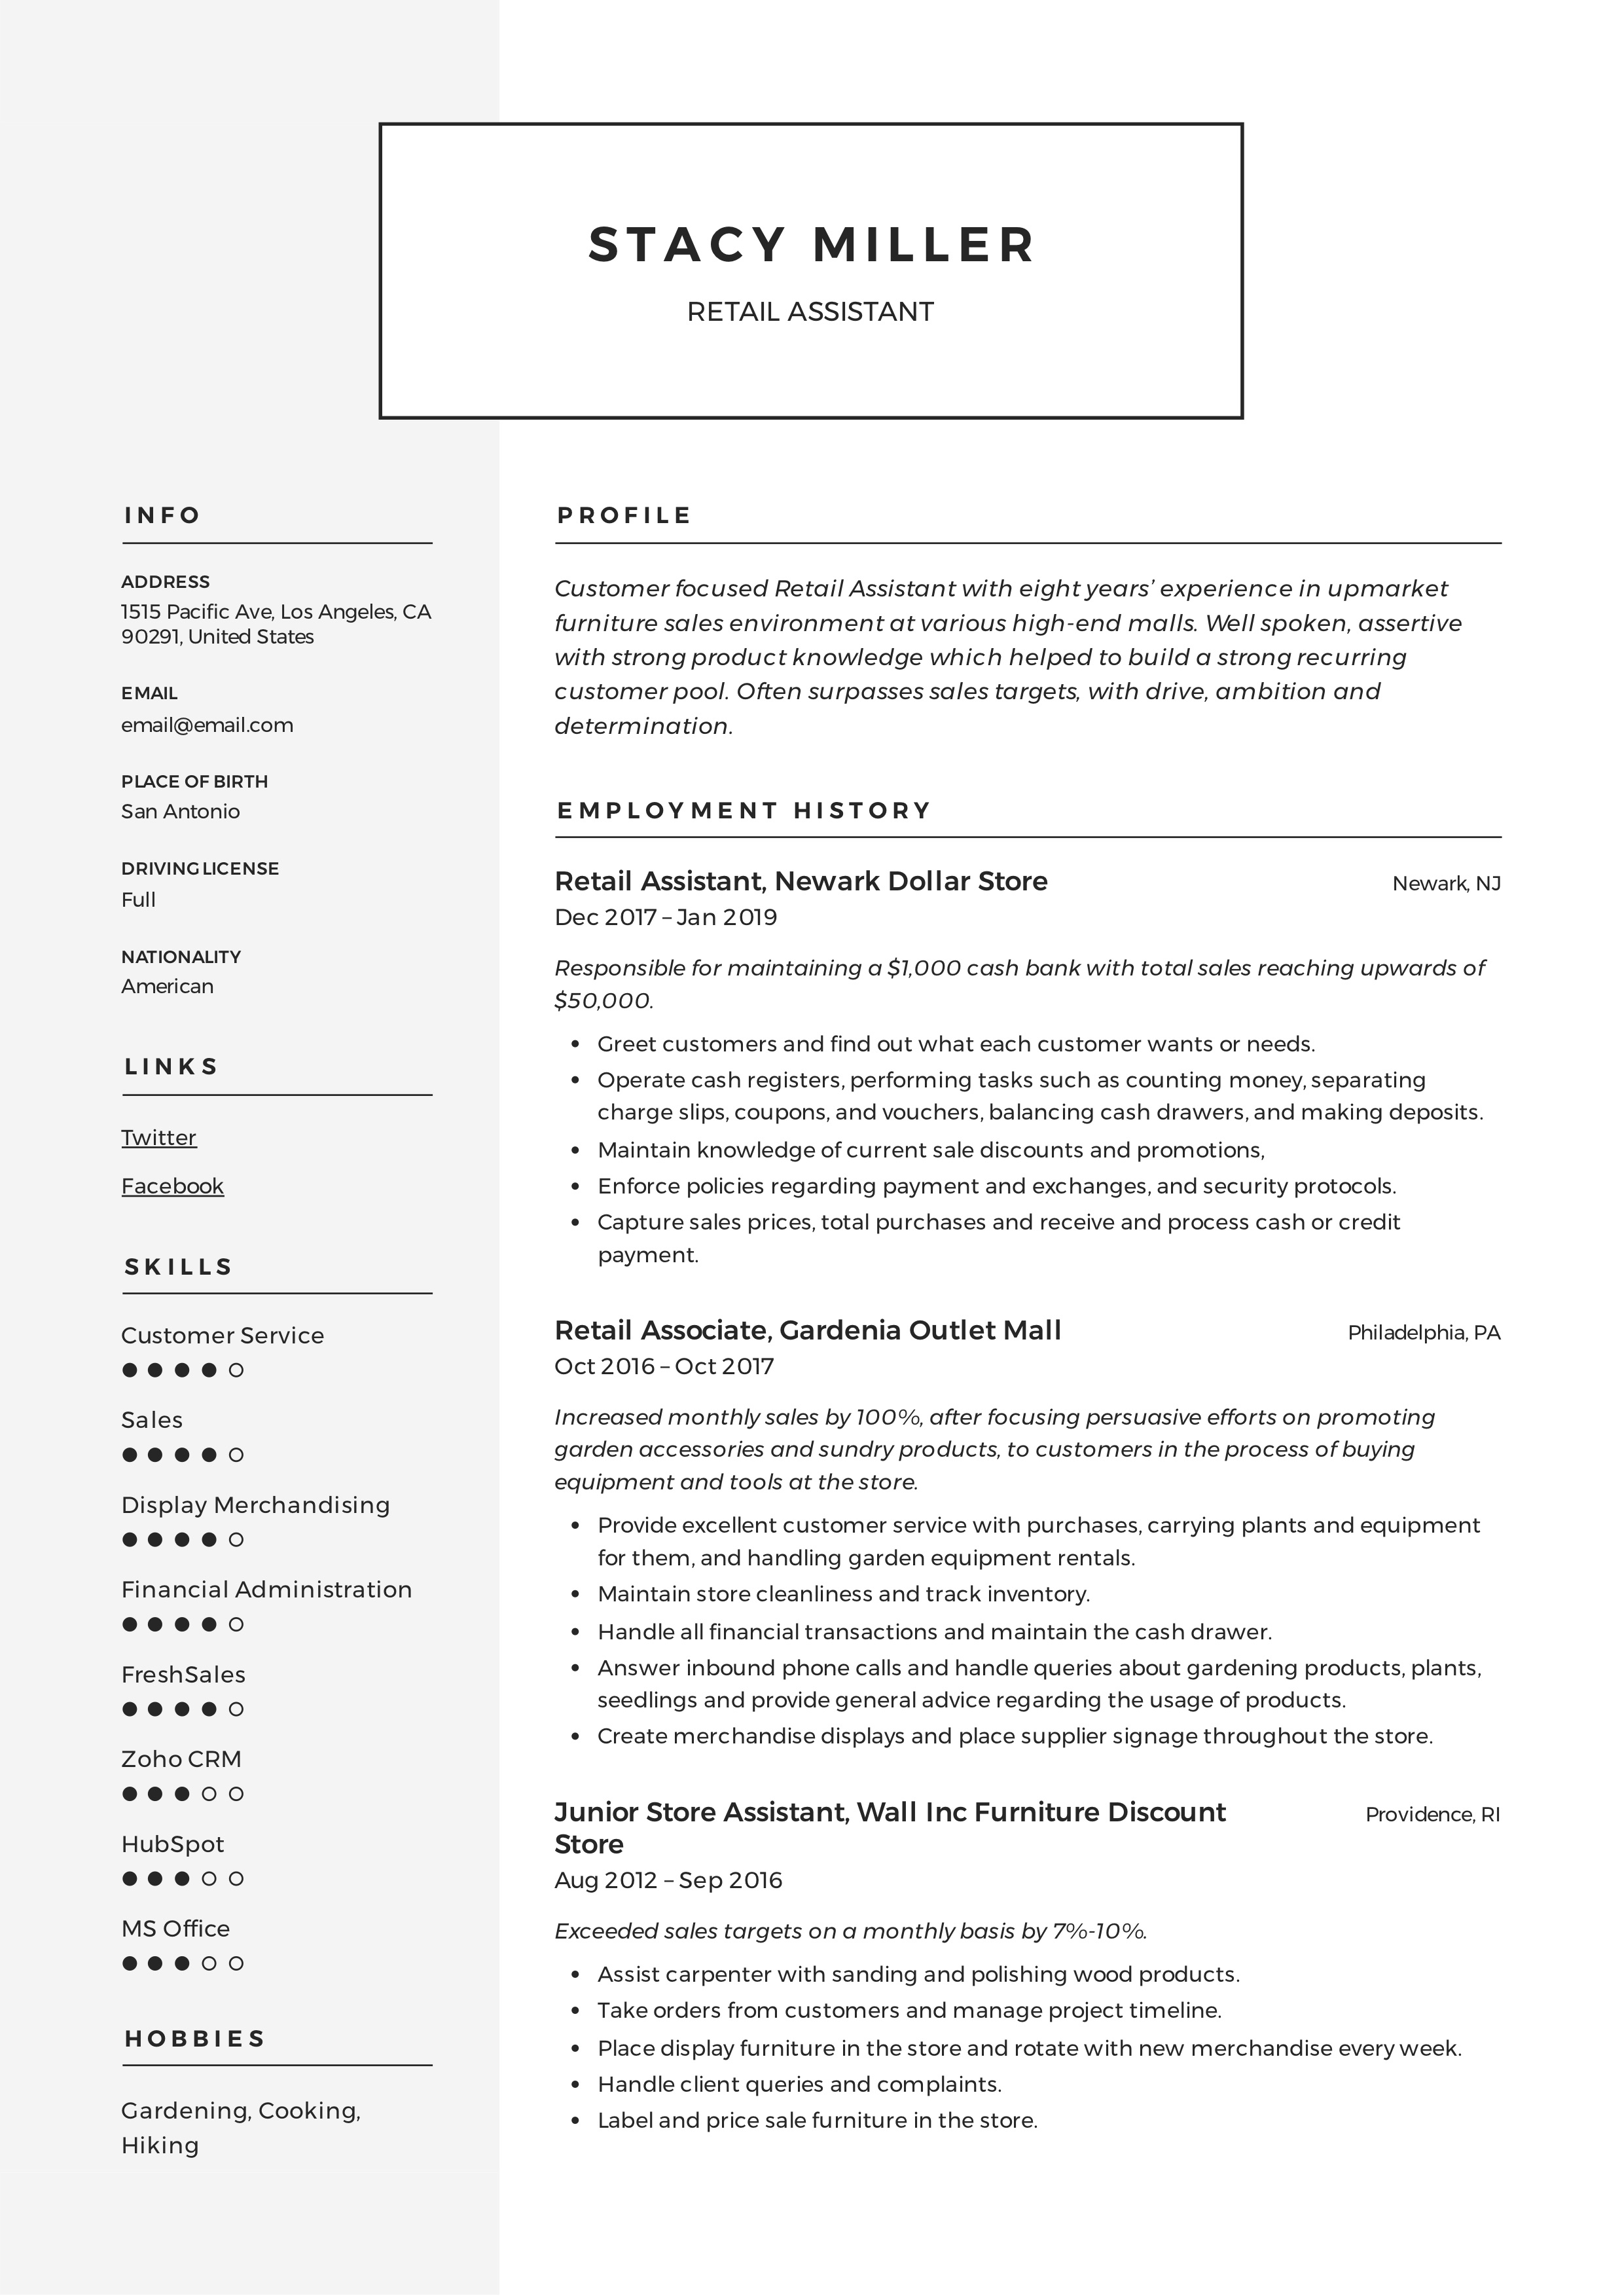 cv personal statement retail assistant